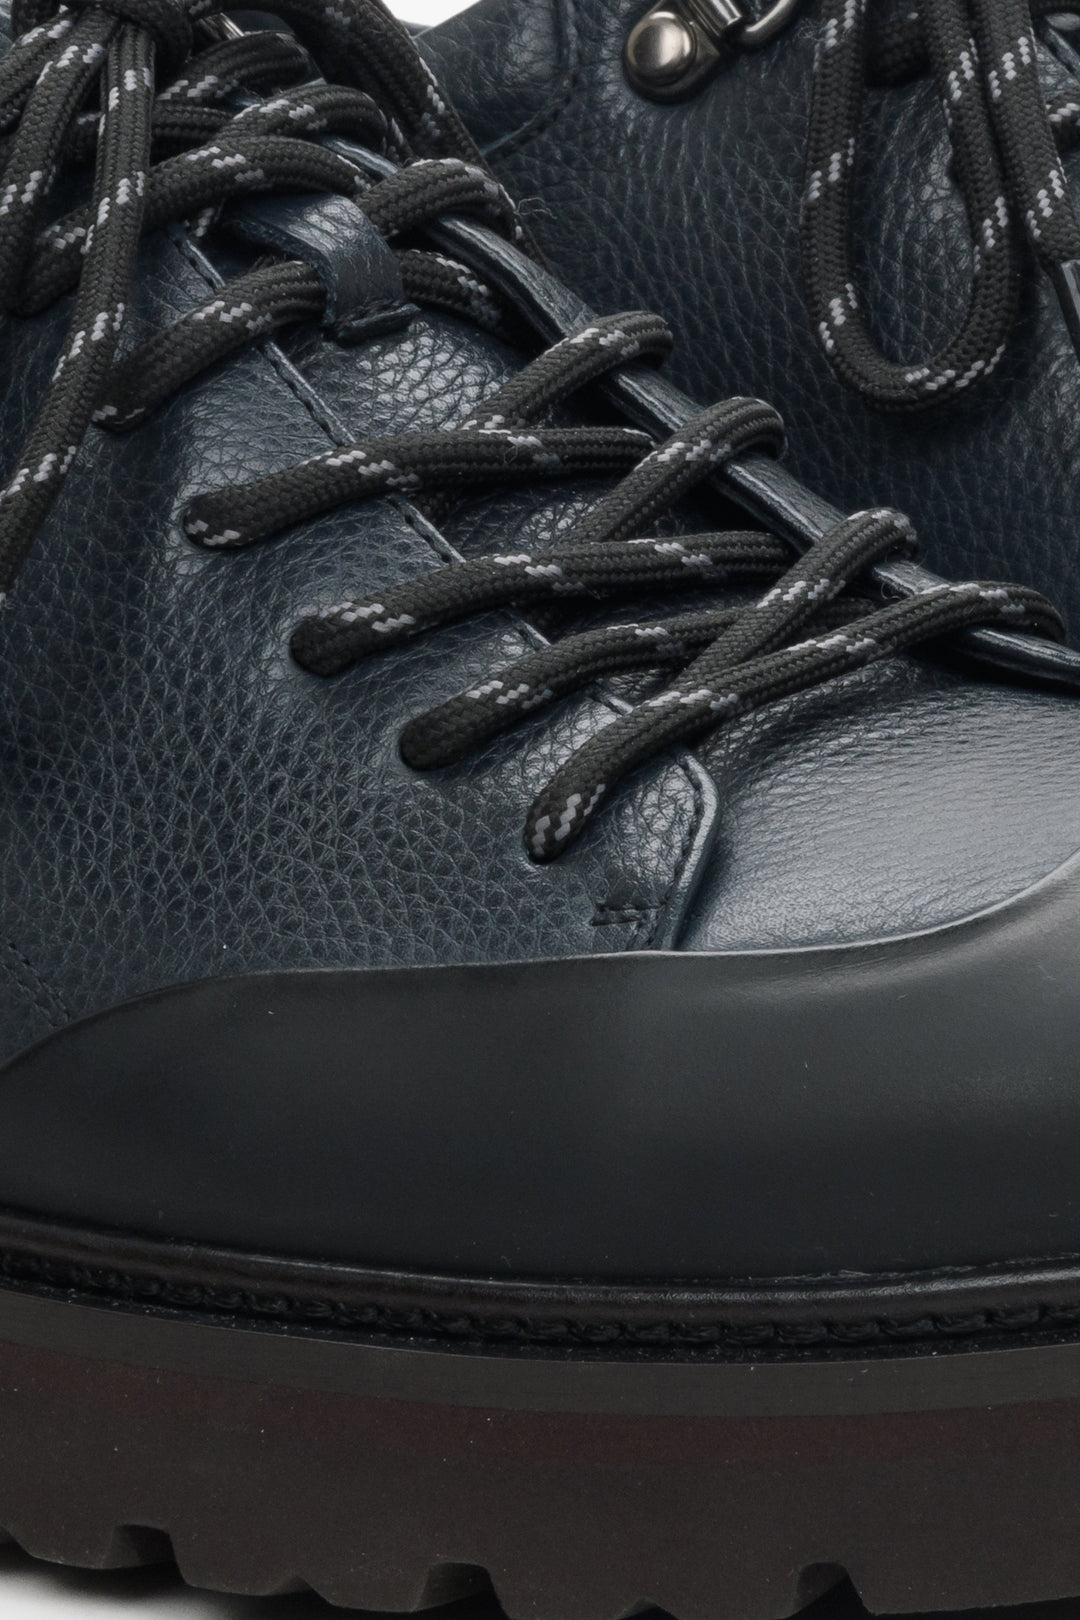 Men's dark blue leather loafers - close-up on the details.